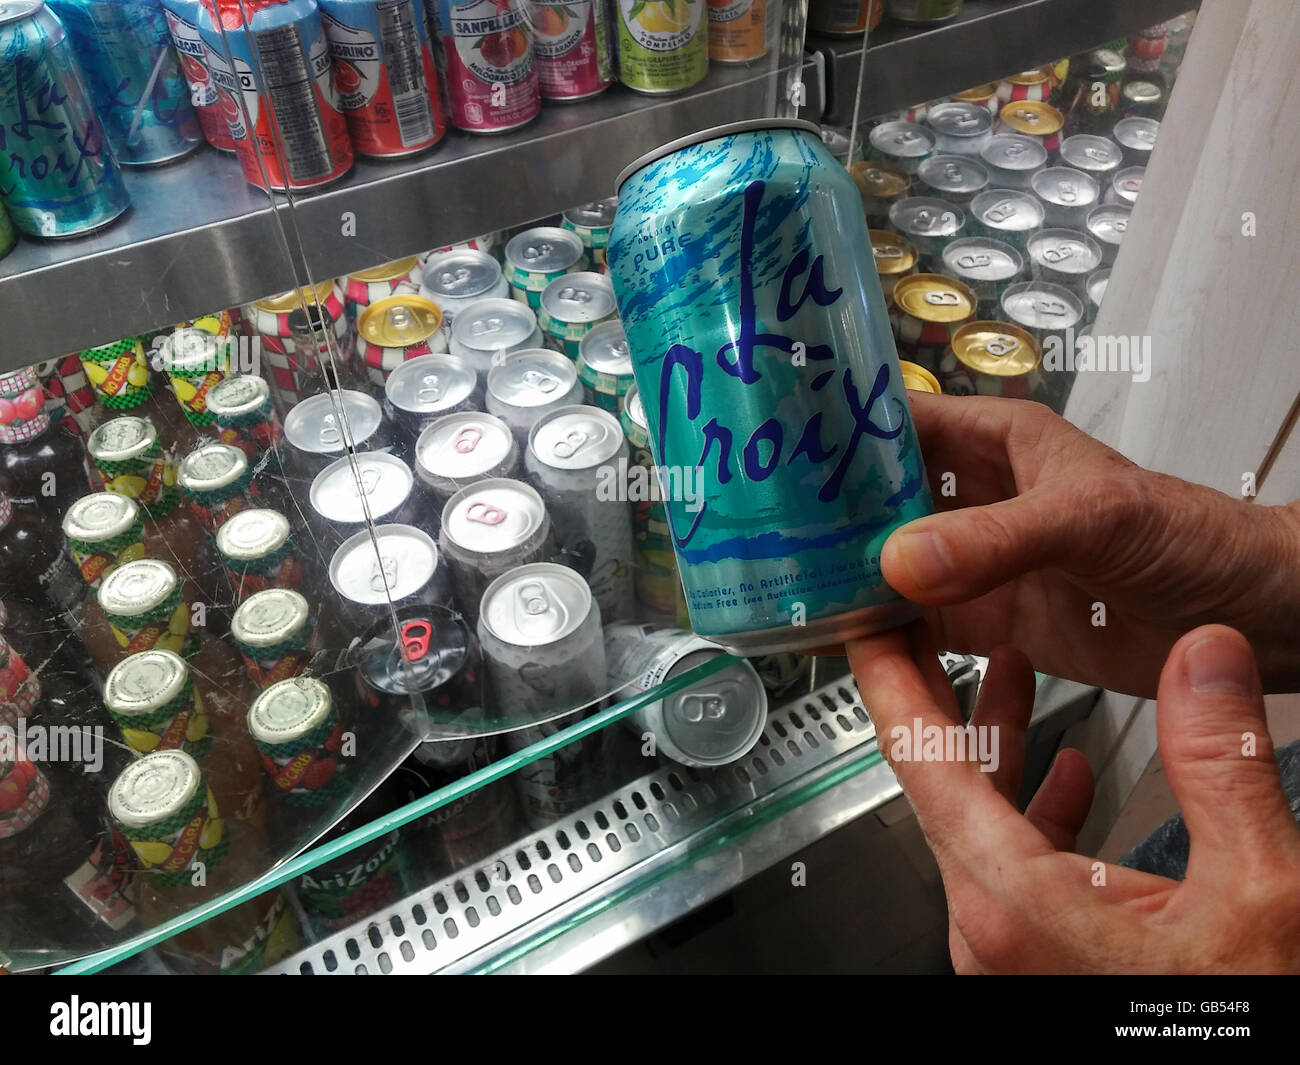 A shopper chooses a can of LaCroix sparkling water in a deli in New York on Monday, July 4, 2016. LaCroix eschews traditional advertising instead relying on their manipulation of social media to attract their millennial demographic. Sales have gone from $65 million in 2010 to $226 million in 2015 making it the number brand of flavored sparkling water in the U.S. (© Richard B. Levine) Stock Photo